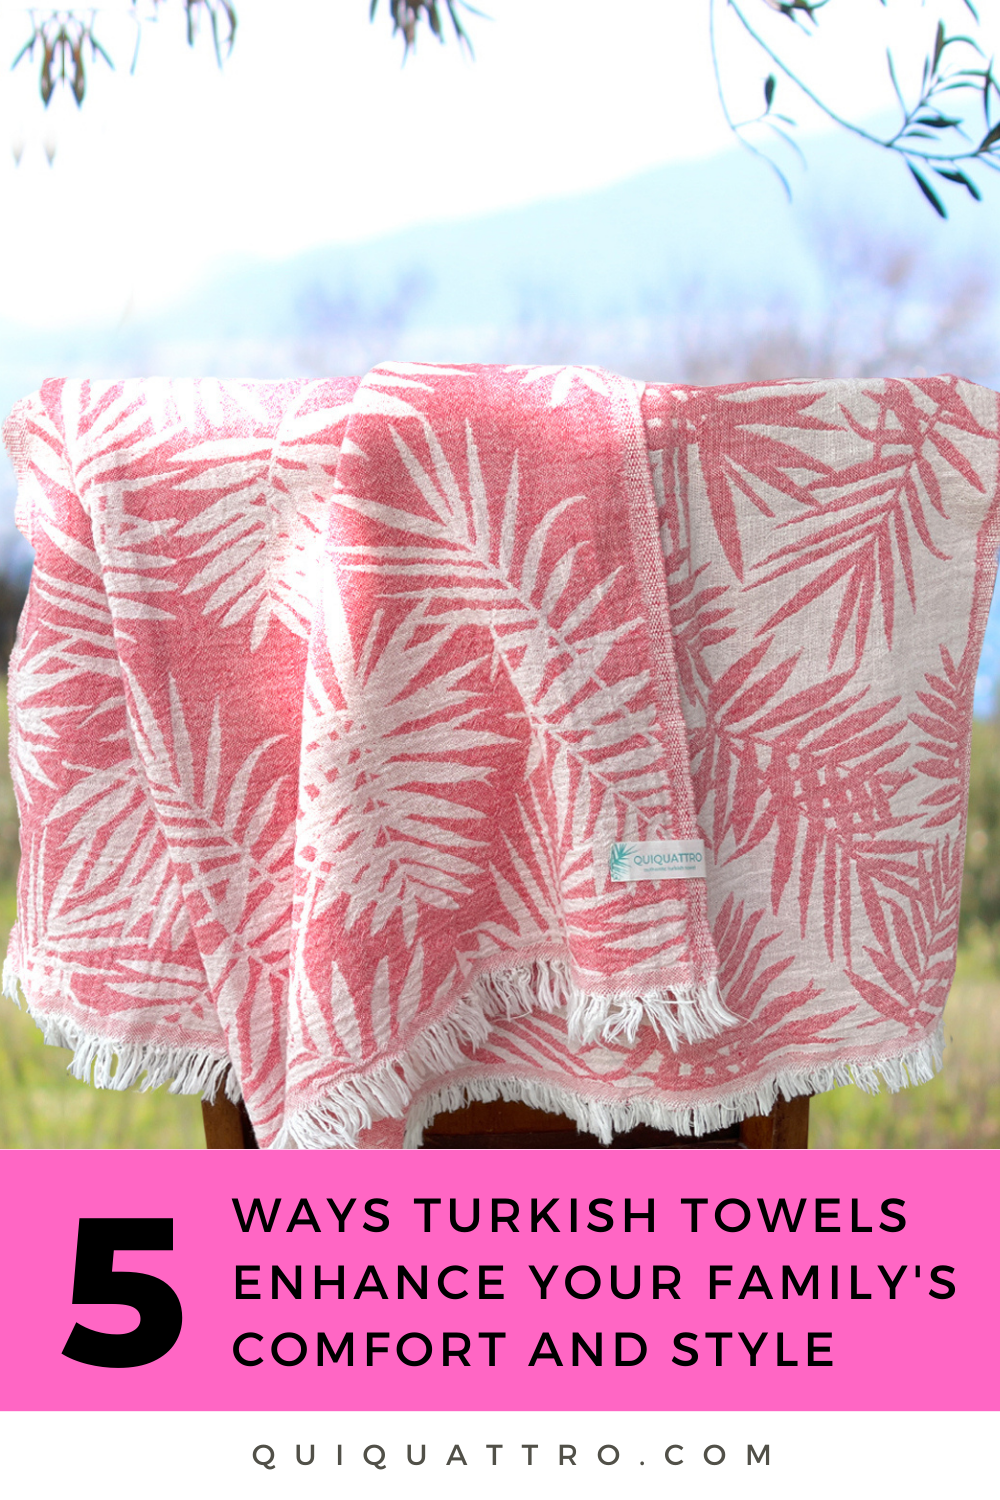 5 Ways Turkish Towels Enhance Your Family's Comfort and Style